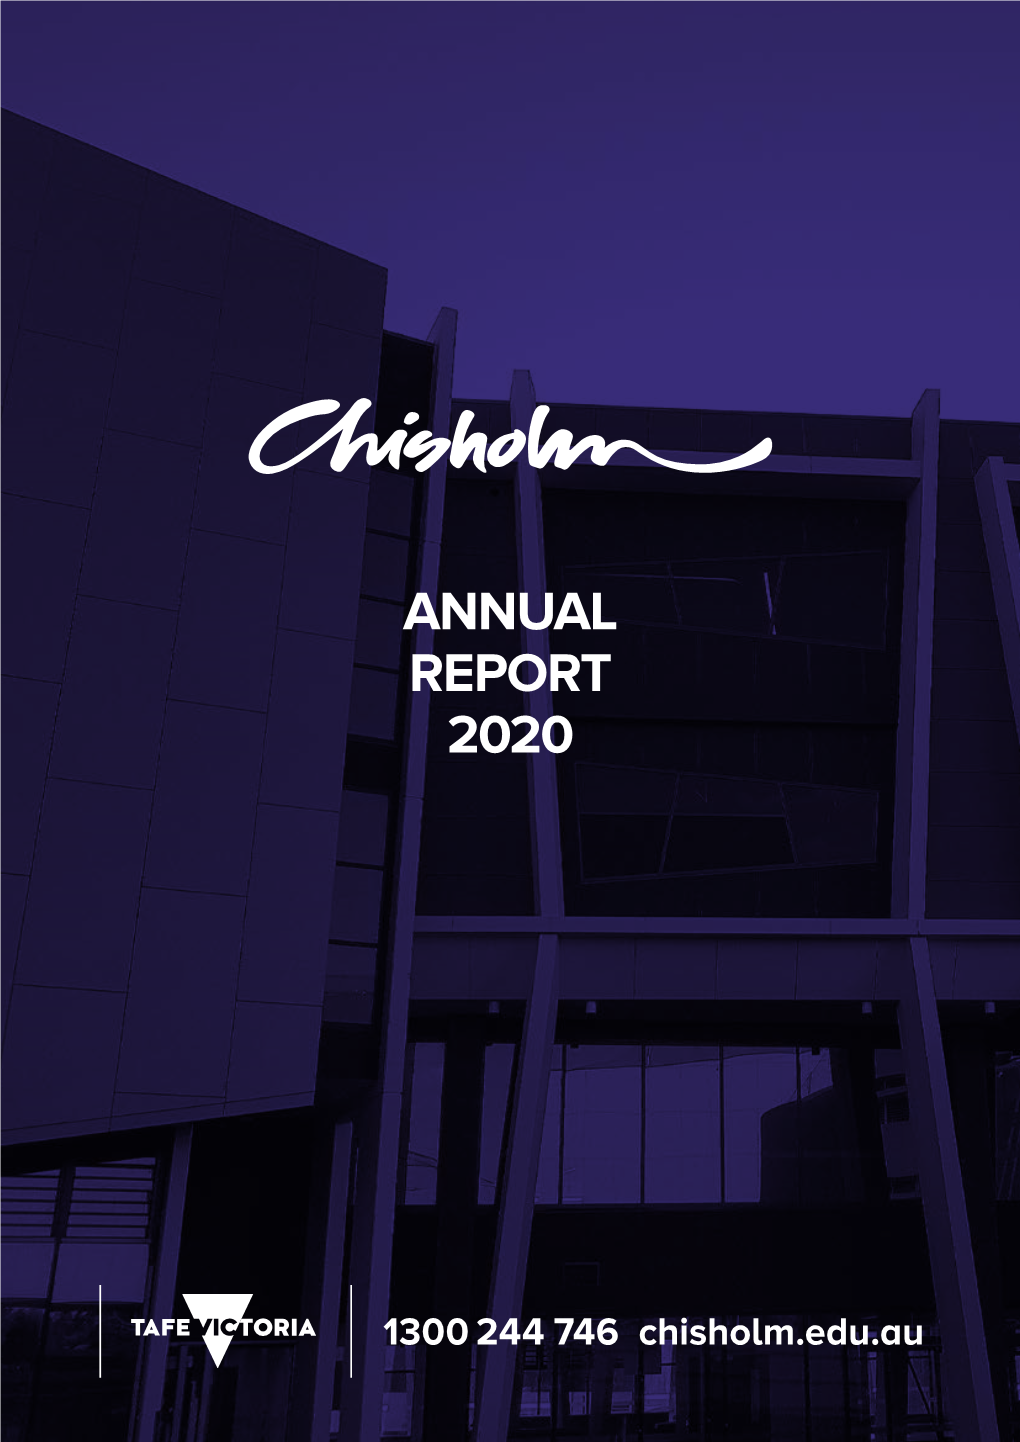 Chisholm Annual Report 2020